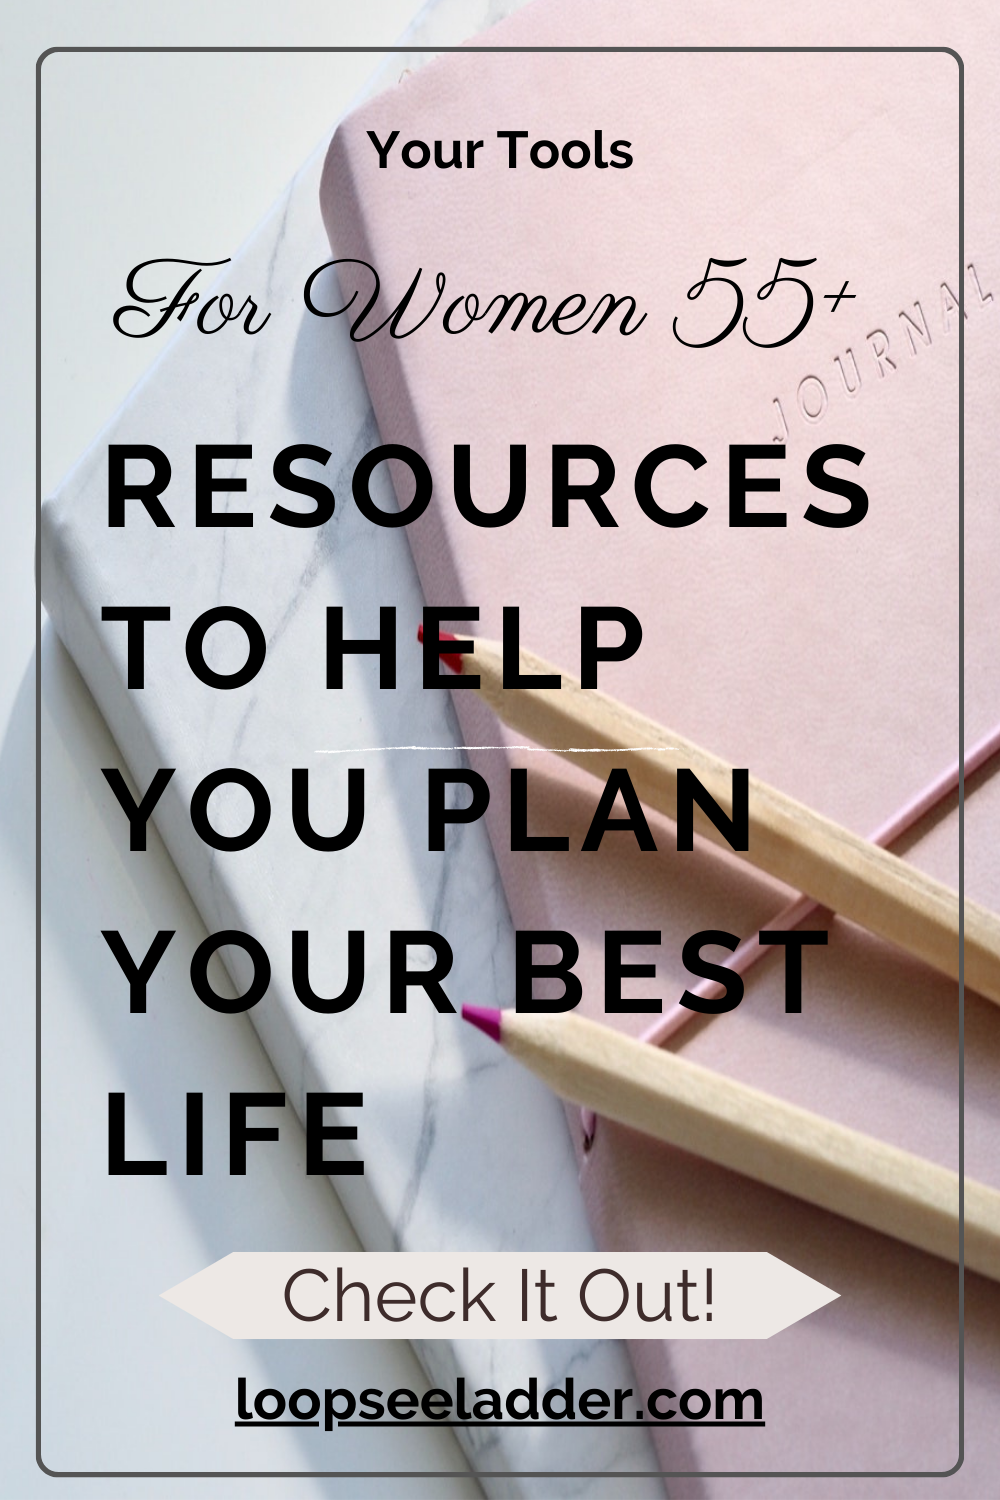 Tools to Help Women Over 55 Plan for Their Best Life